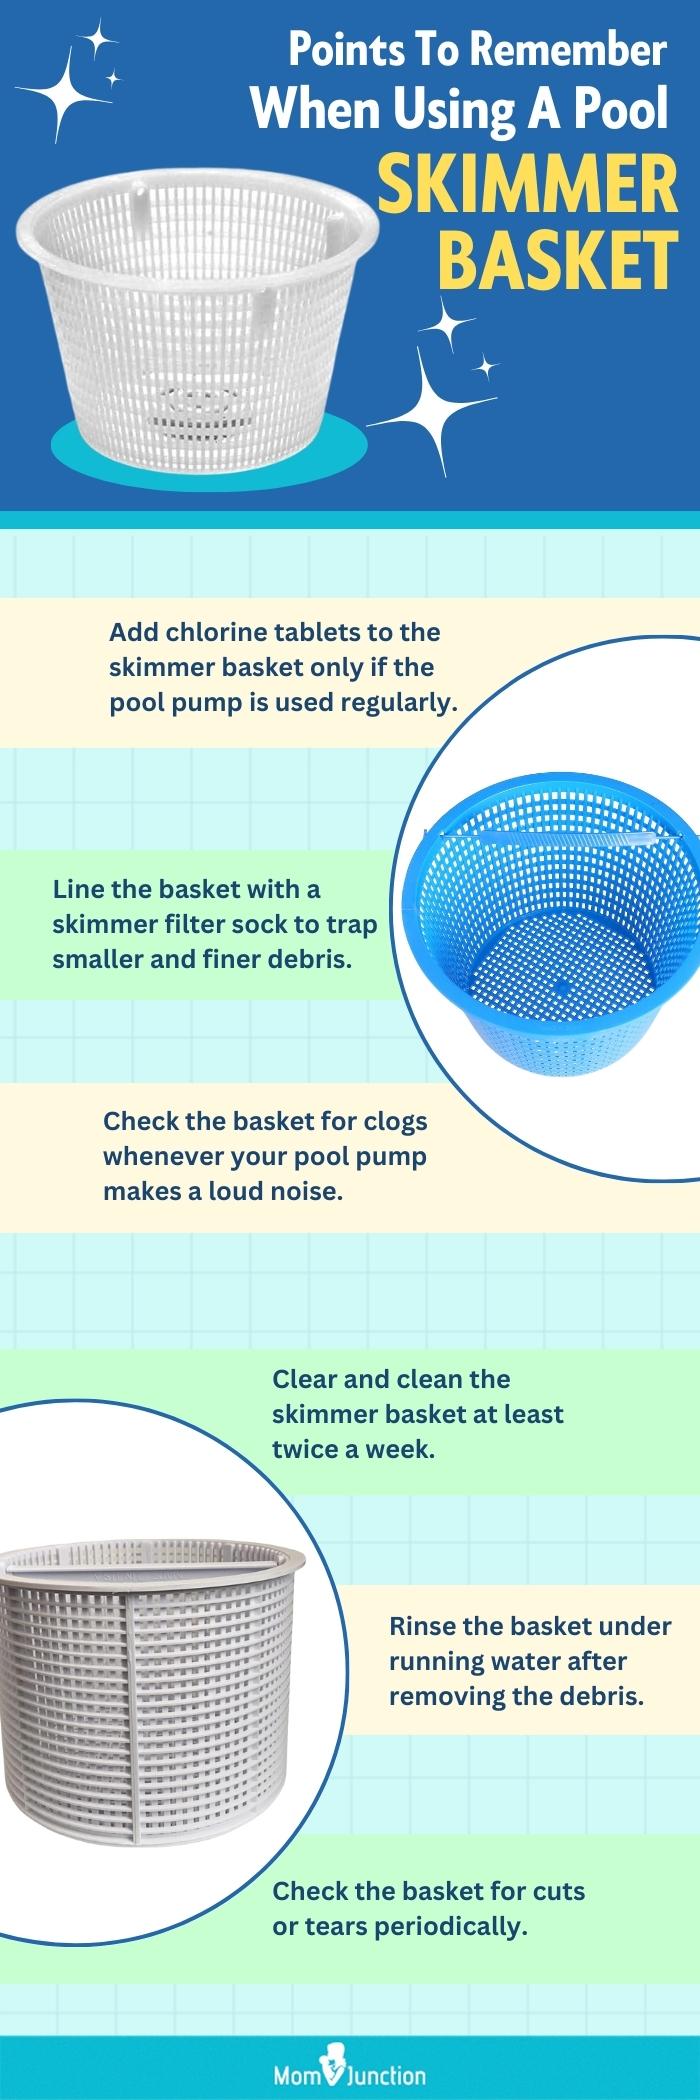 Points To Remember When Using A Pool Skimmer Basket (infographic)